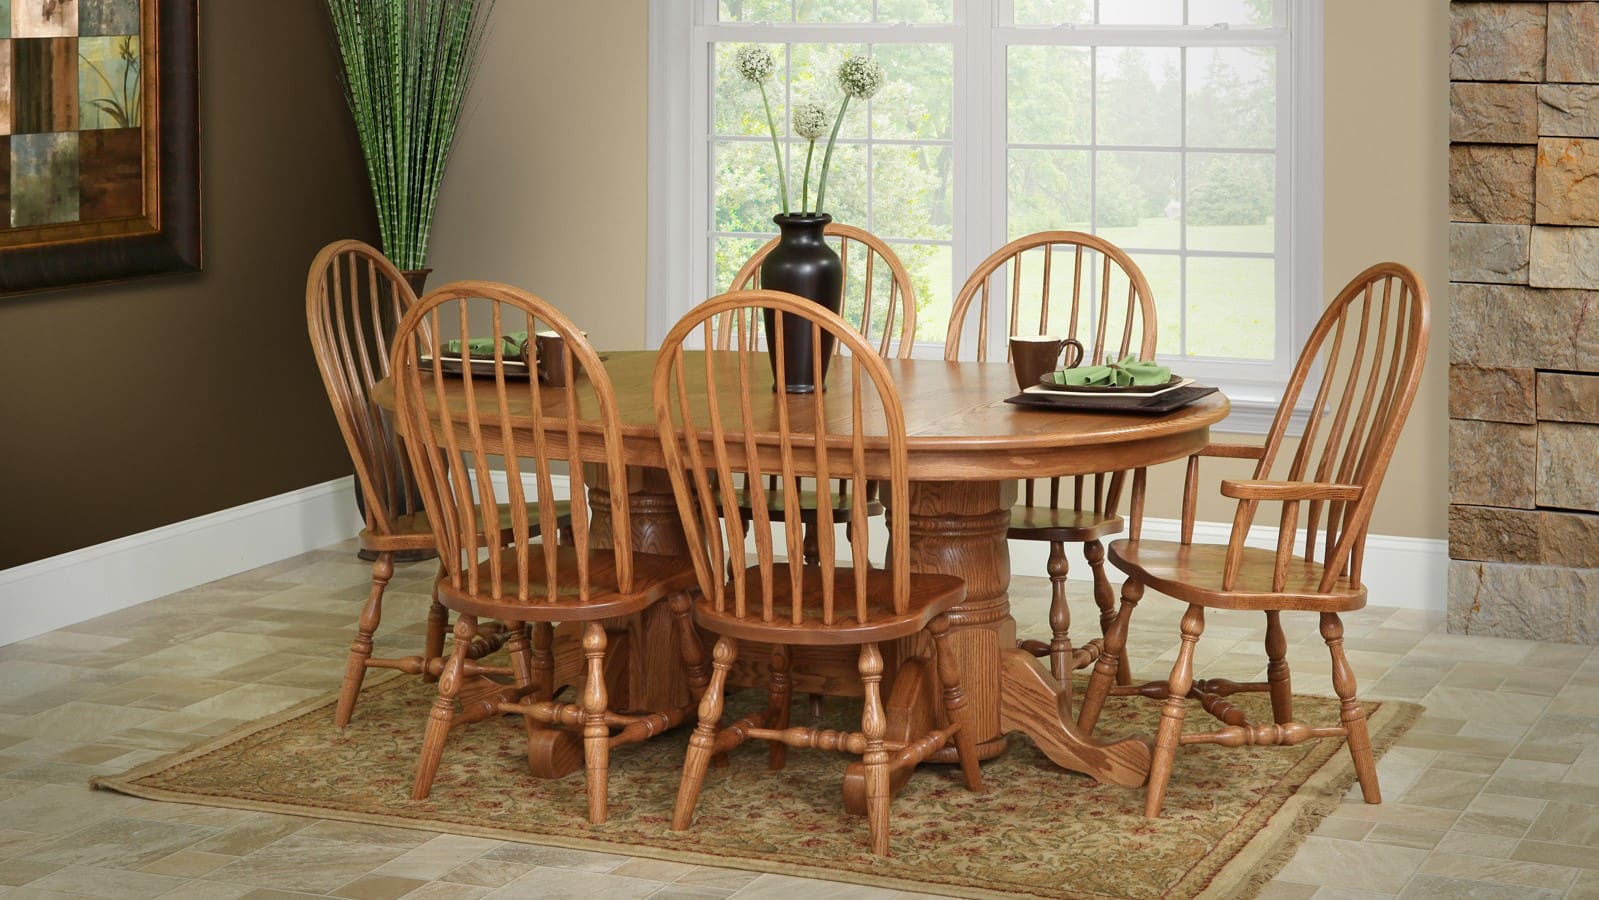 Chateau dining room set